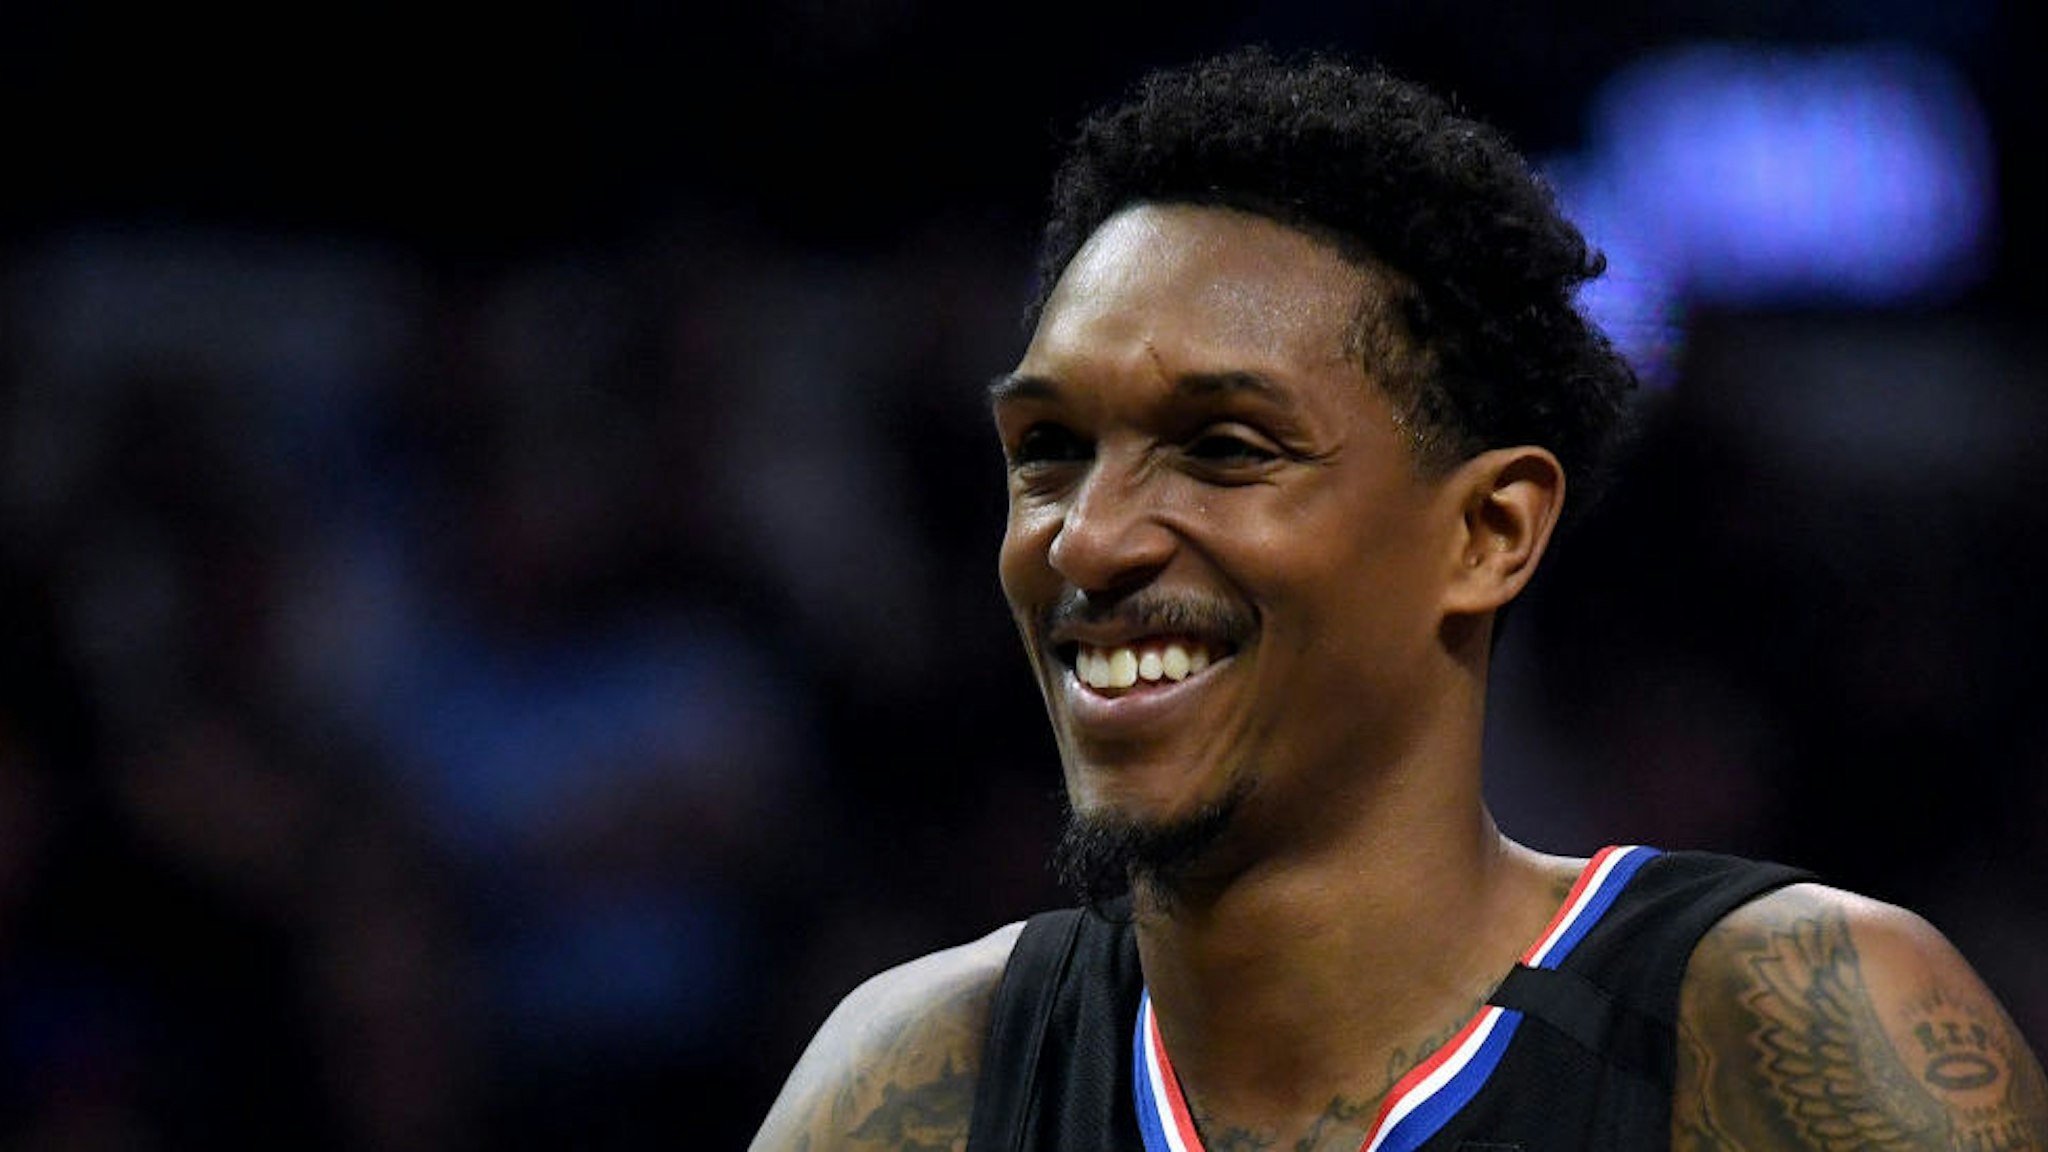 LOS ANGELES, CALIFORNIA - FEBRUARY 28: Lou Williams #23 of the LA Clippers smiles during a timeout in the game against the Denver Nuggets at Staples Center on February 28, 2020 in Los Angeles, California. (Photo by Harry How/Getty Images)